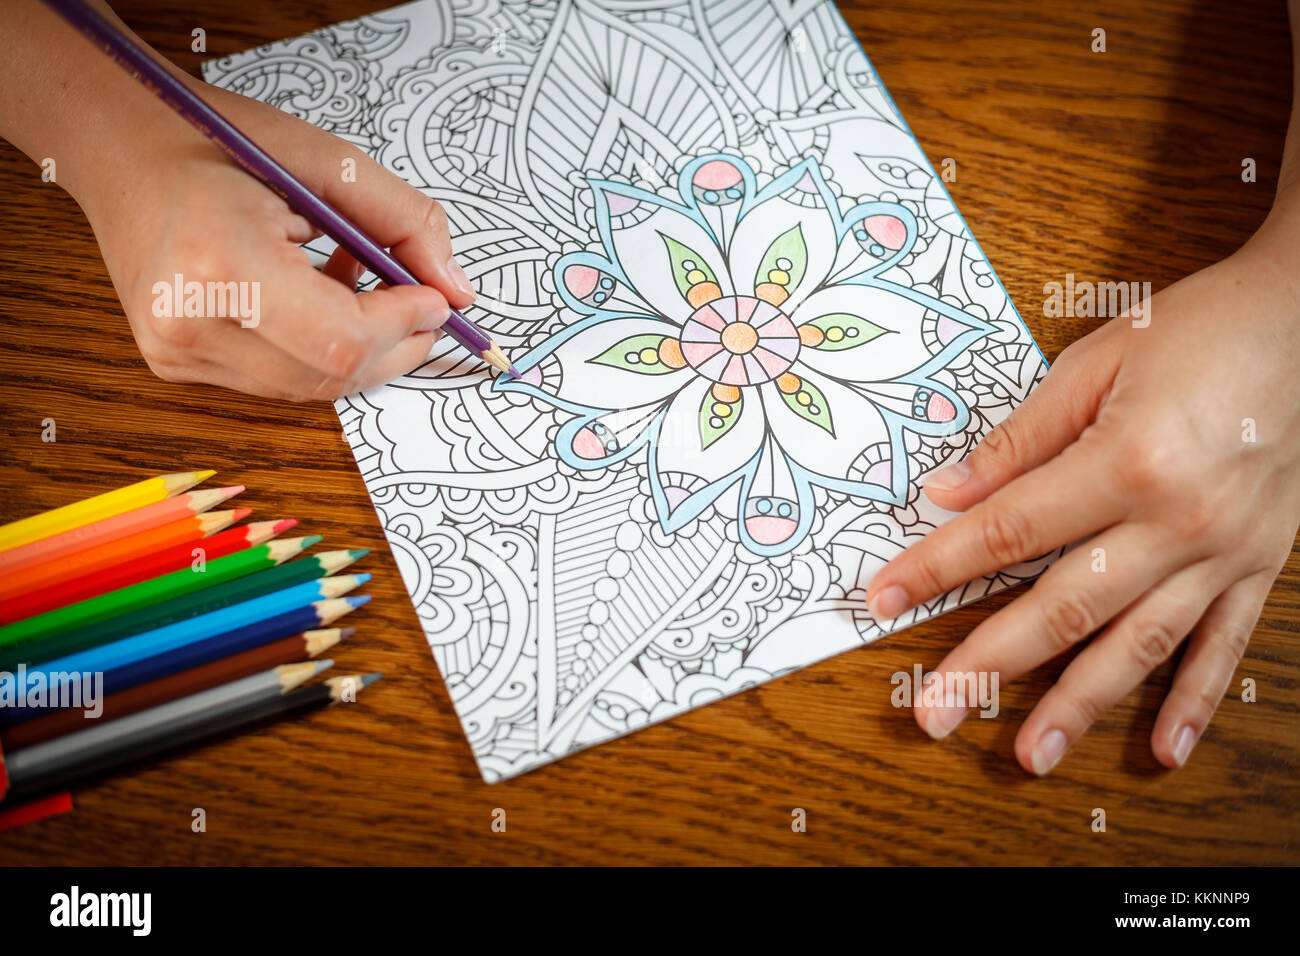 Adult coloring book Stock Photo